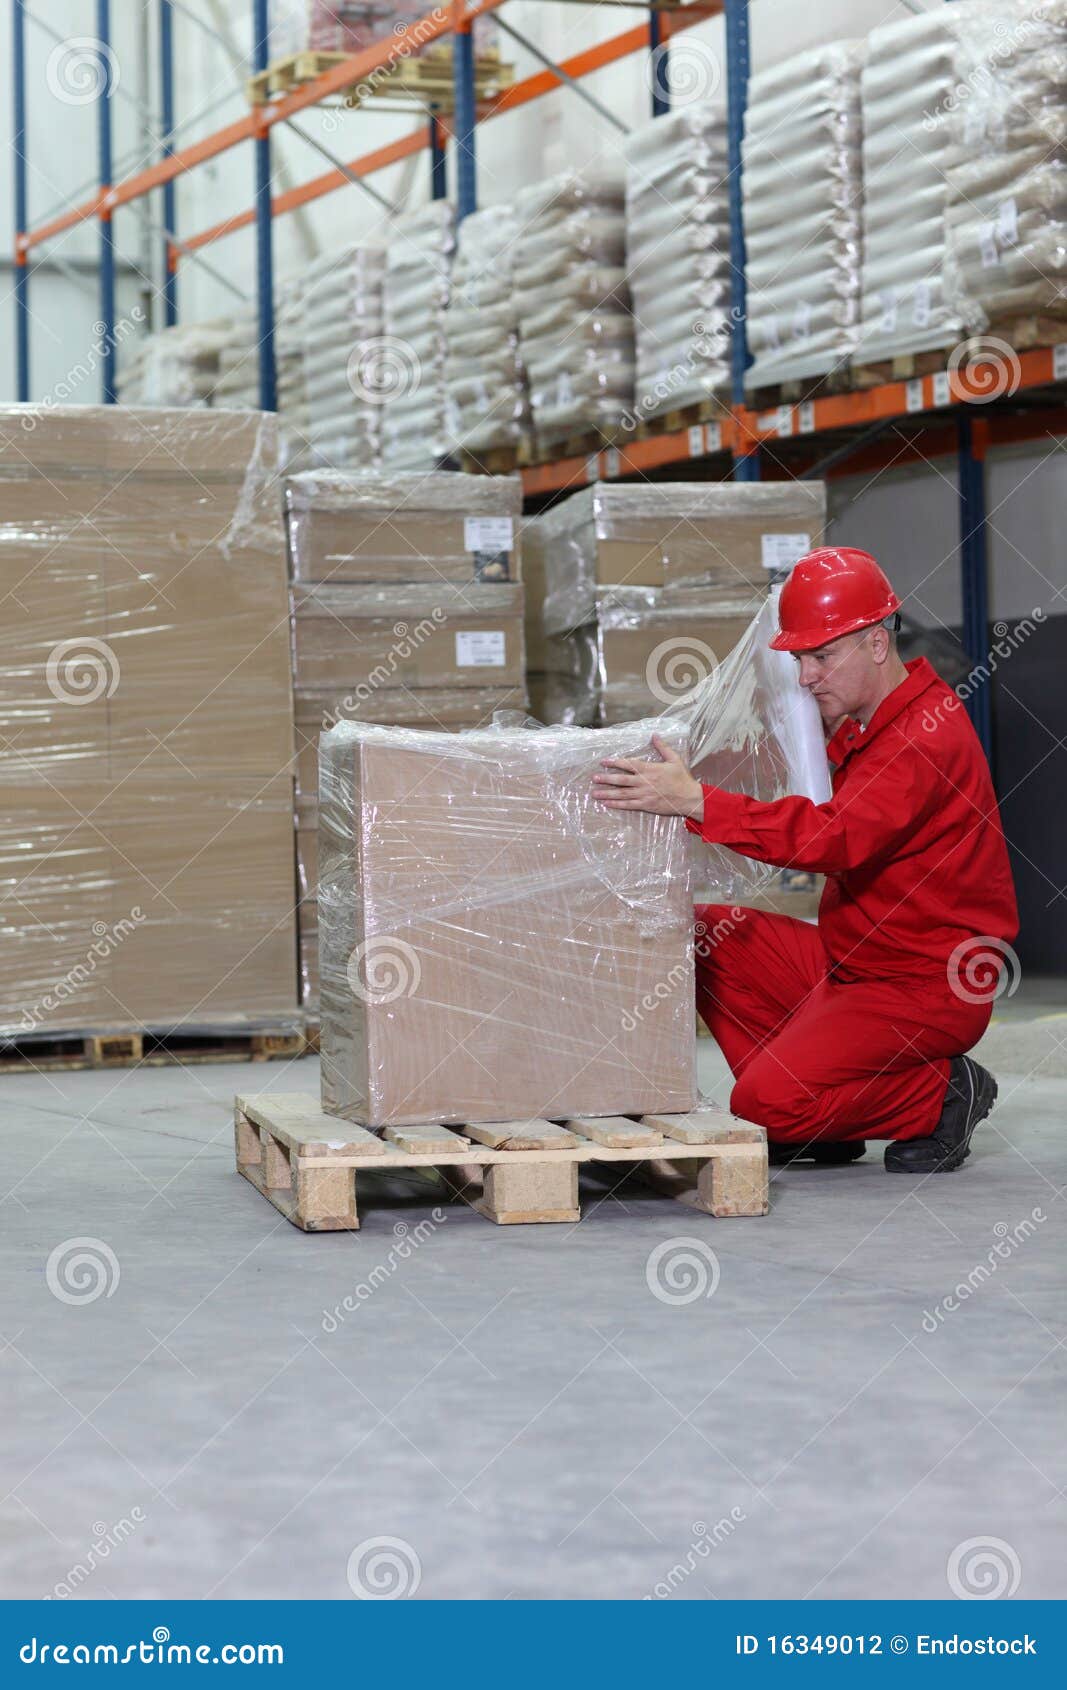 crouching worker wrapping box on pallet